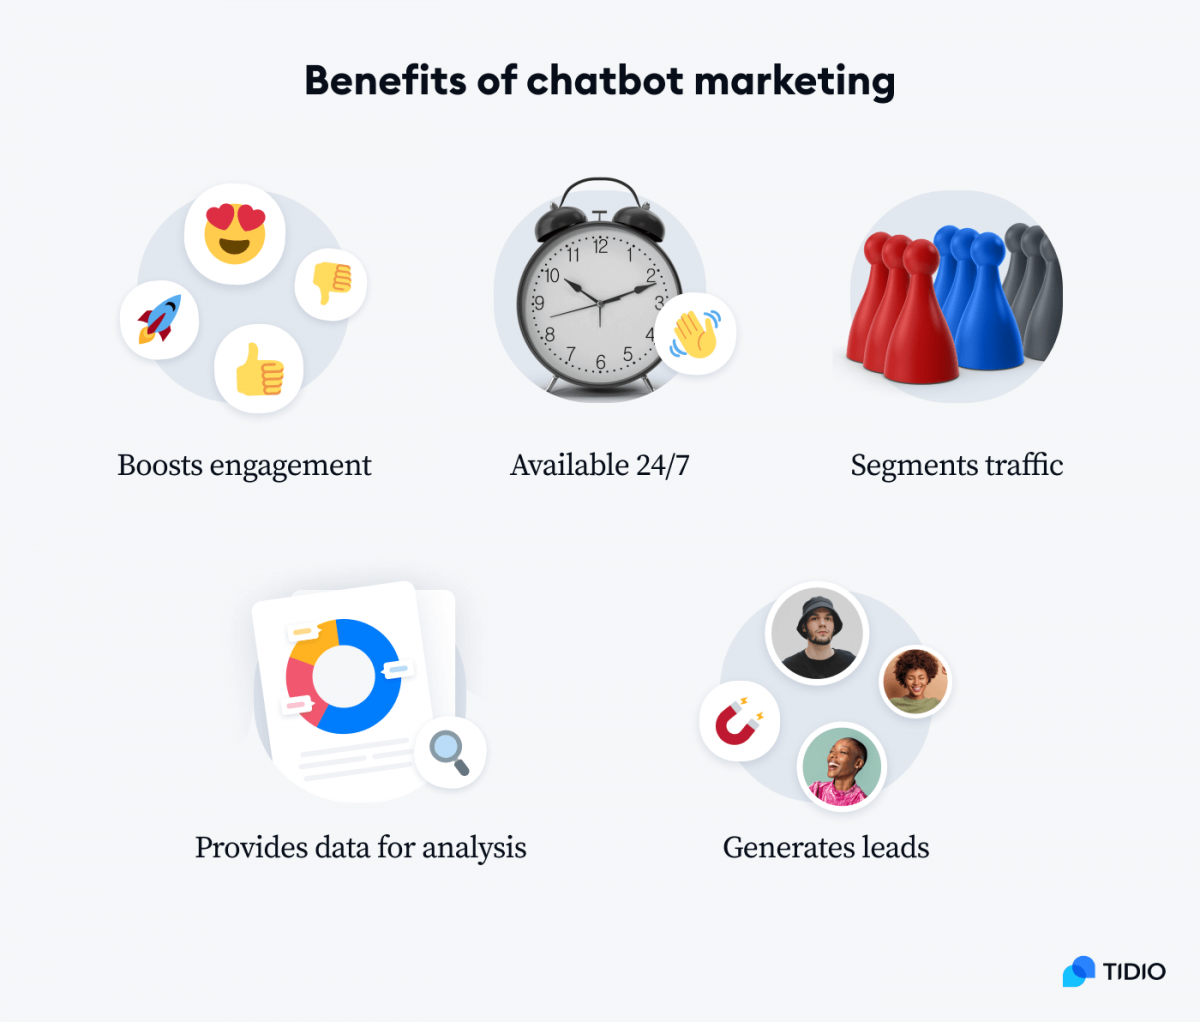 An infographic presenting benefits of chatbot marketing: boost engagement, available 24/7, segments traffic, provides data for analysis, generates leads